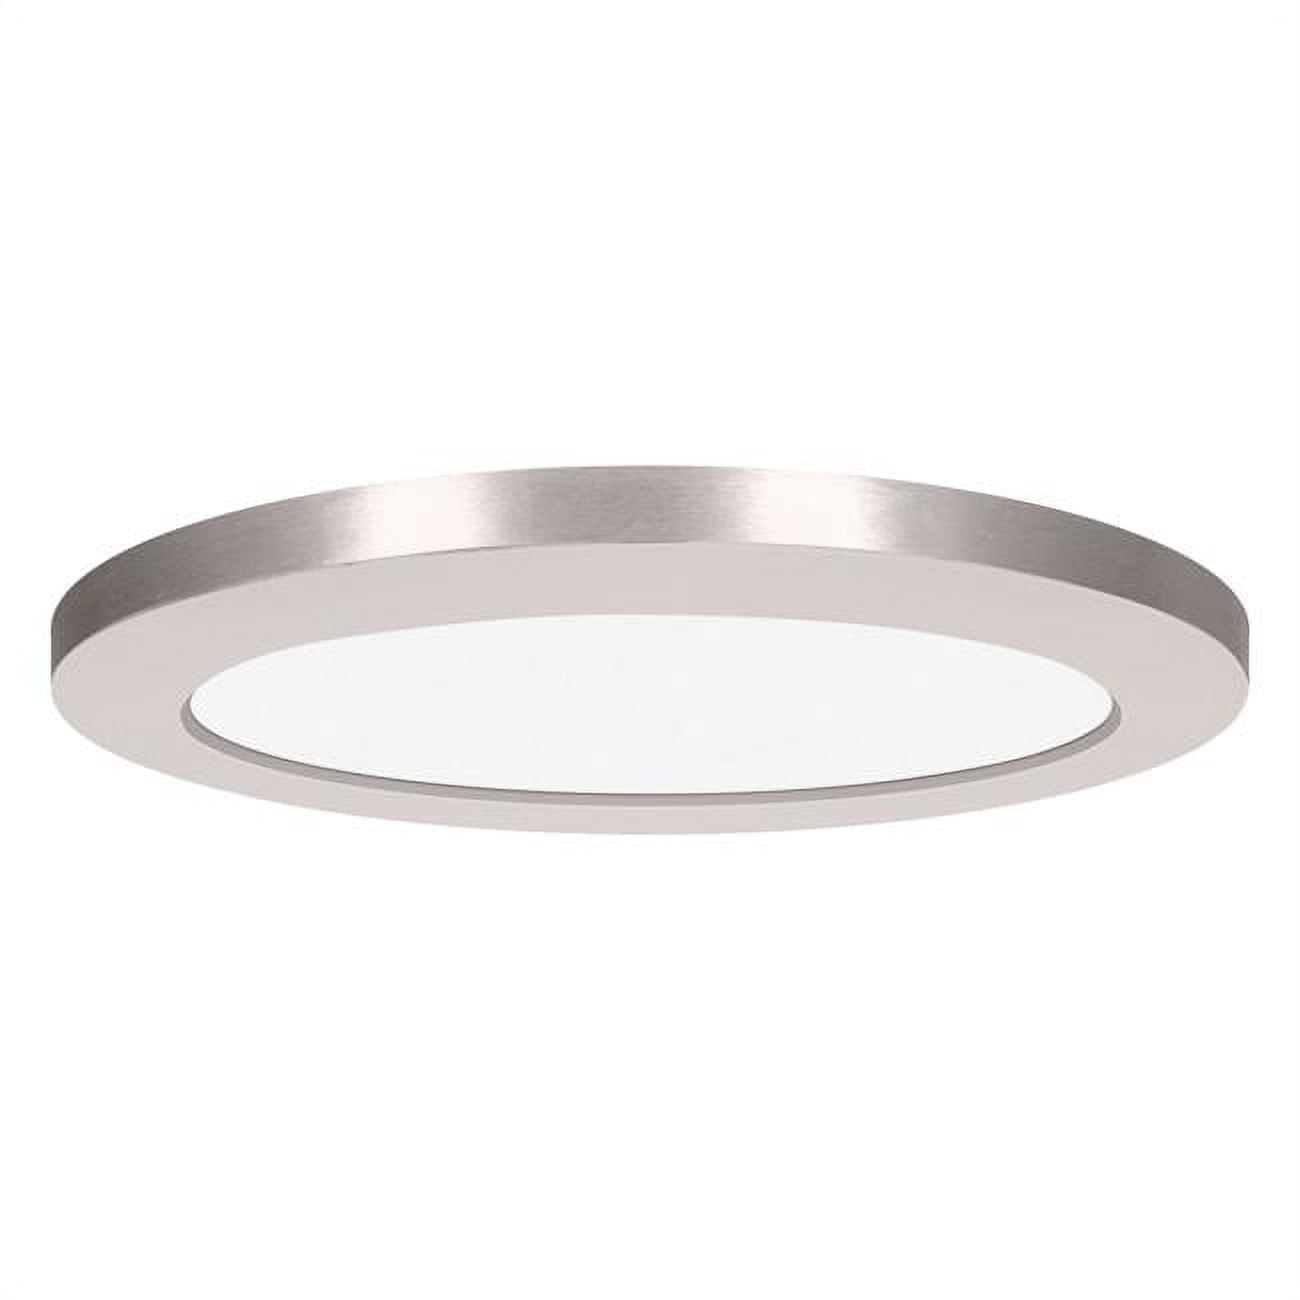 Picture of Access Lighting 20832TRIM-BS 12 in. ModPLUS Brushed Steel Trim Recessed for 20832 & 20838